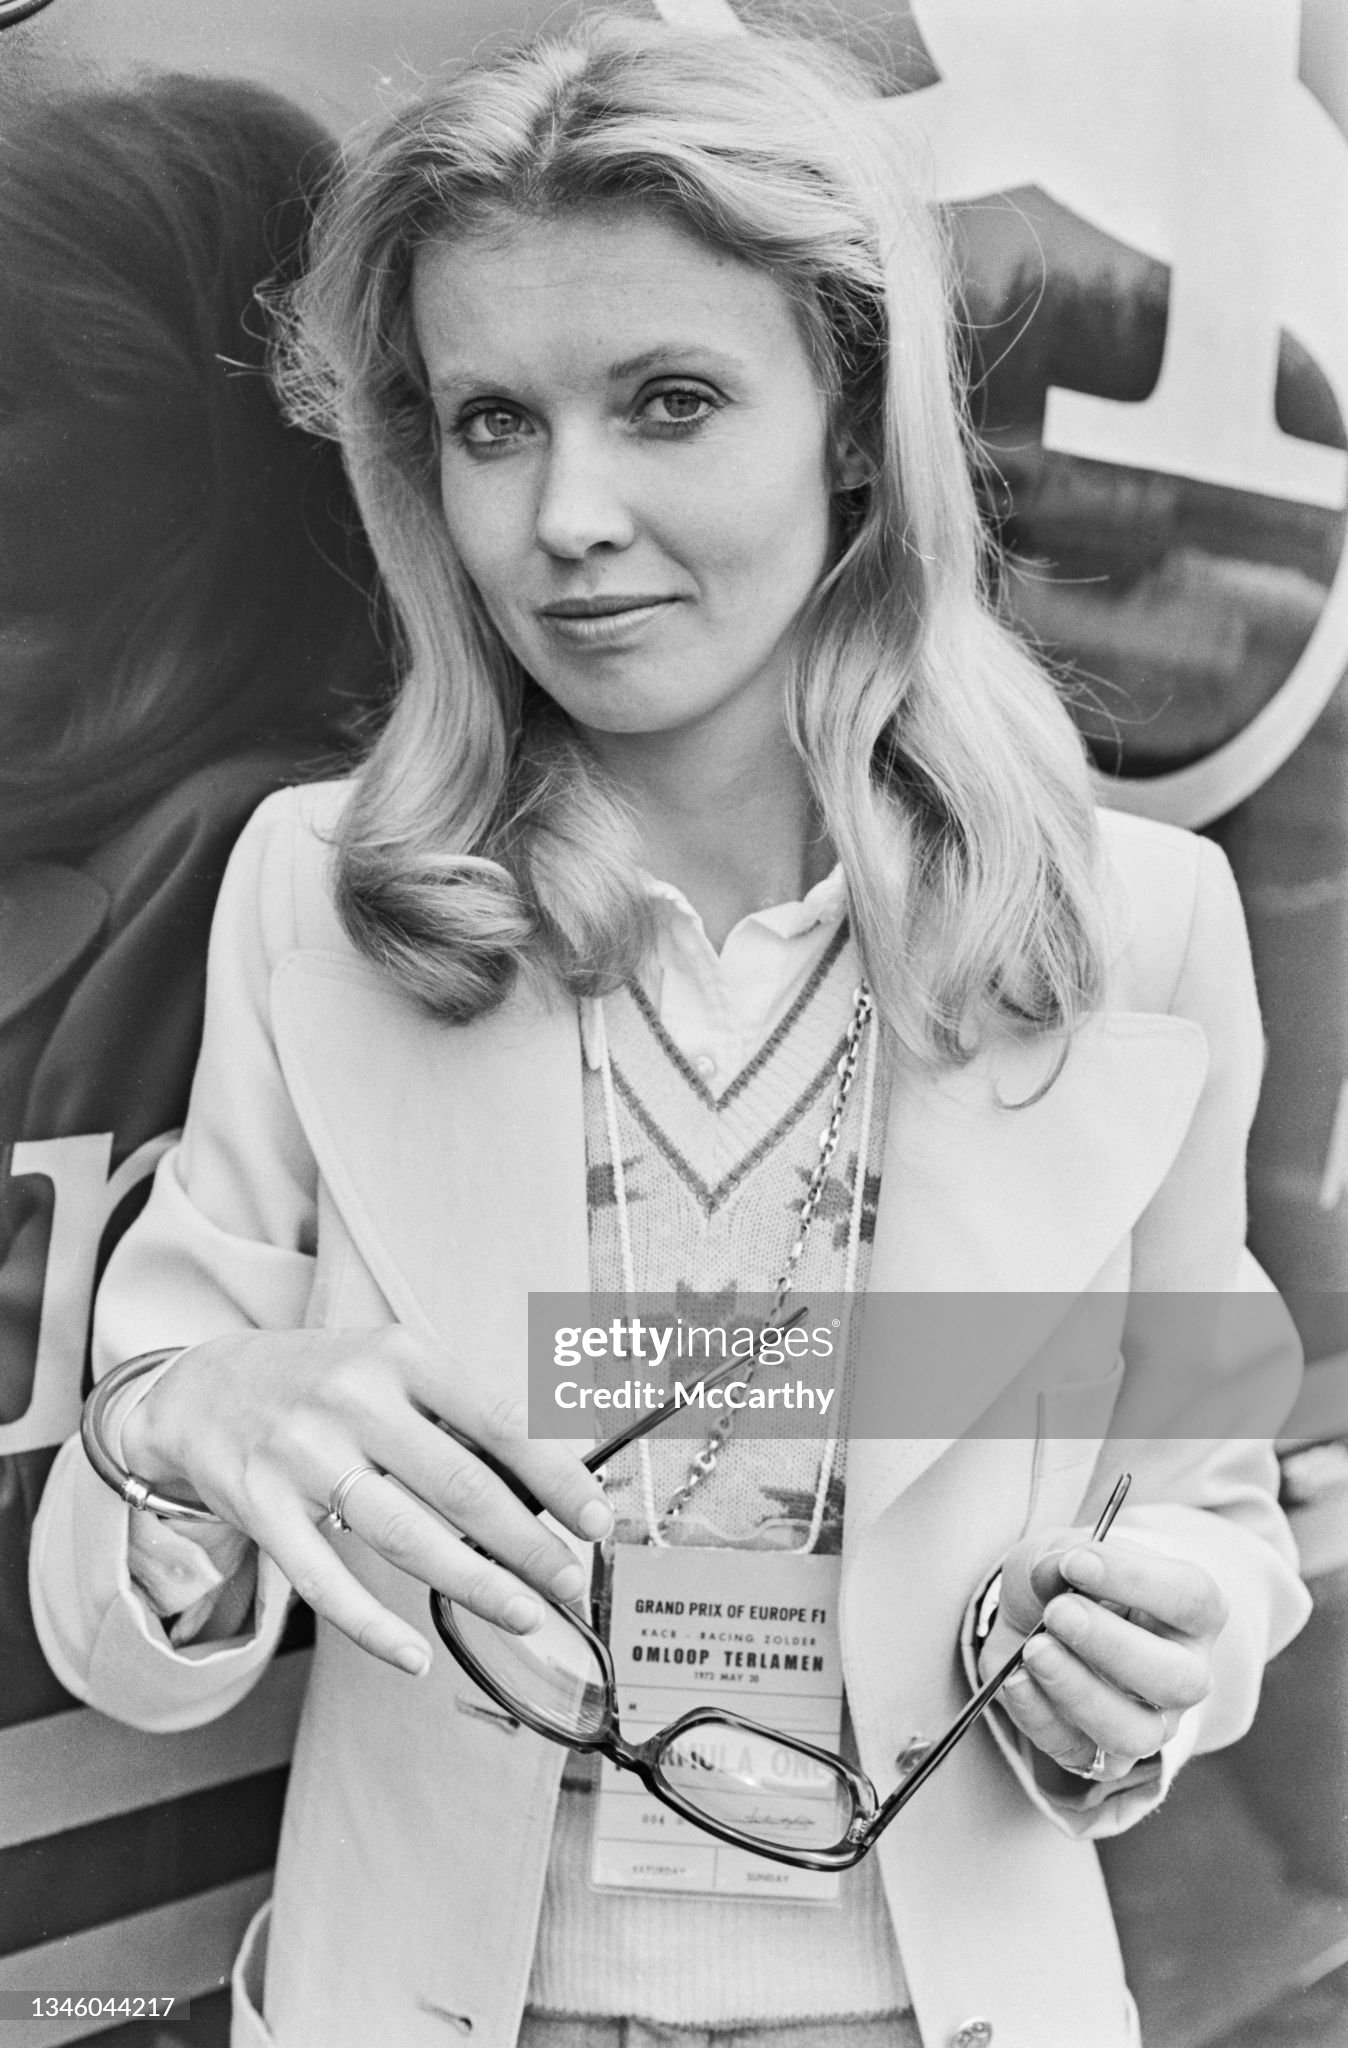 Barbro Edwardsson, the girlfriend of Swedish racing driver Ronnie Peterson, in UK on May 01, 1973. 